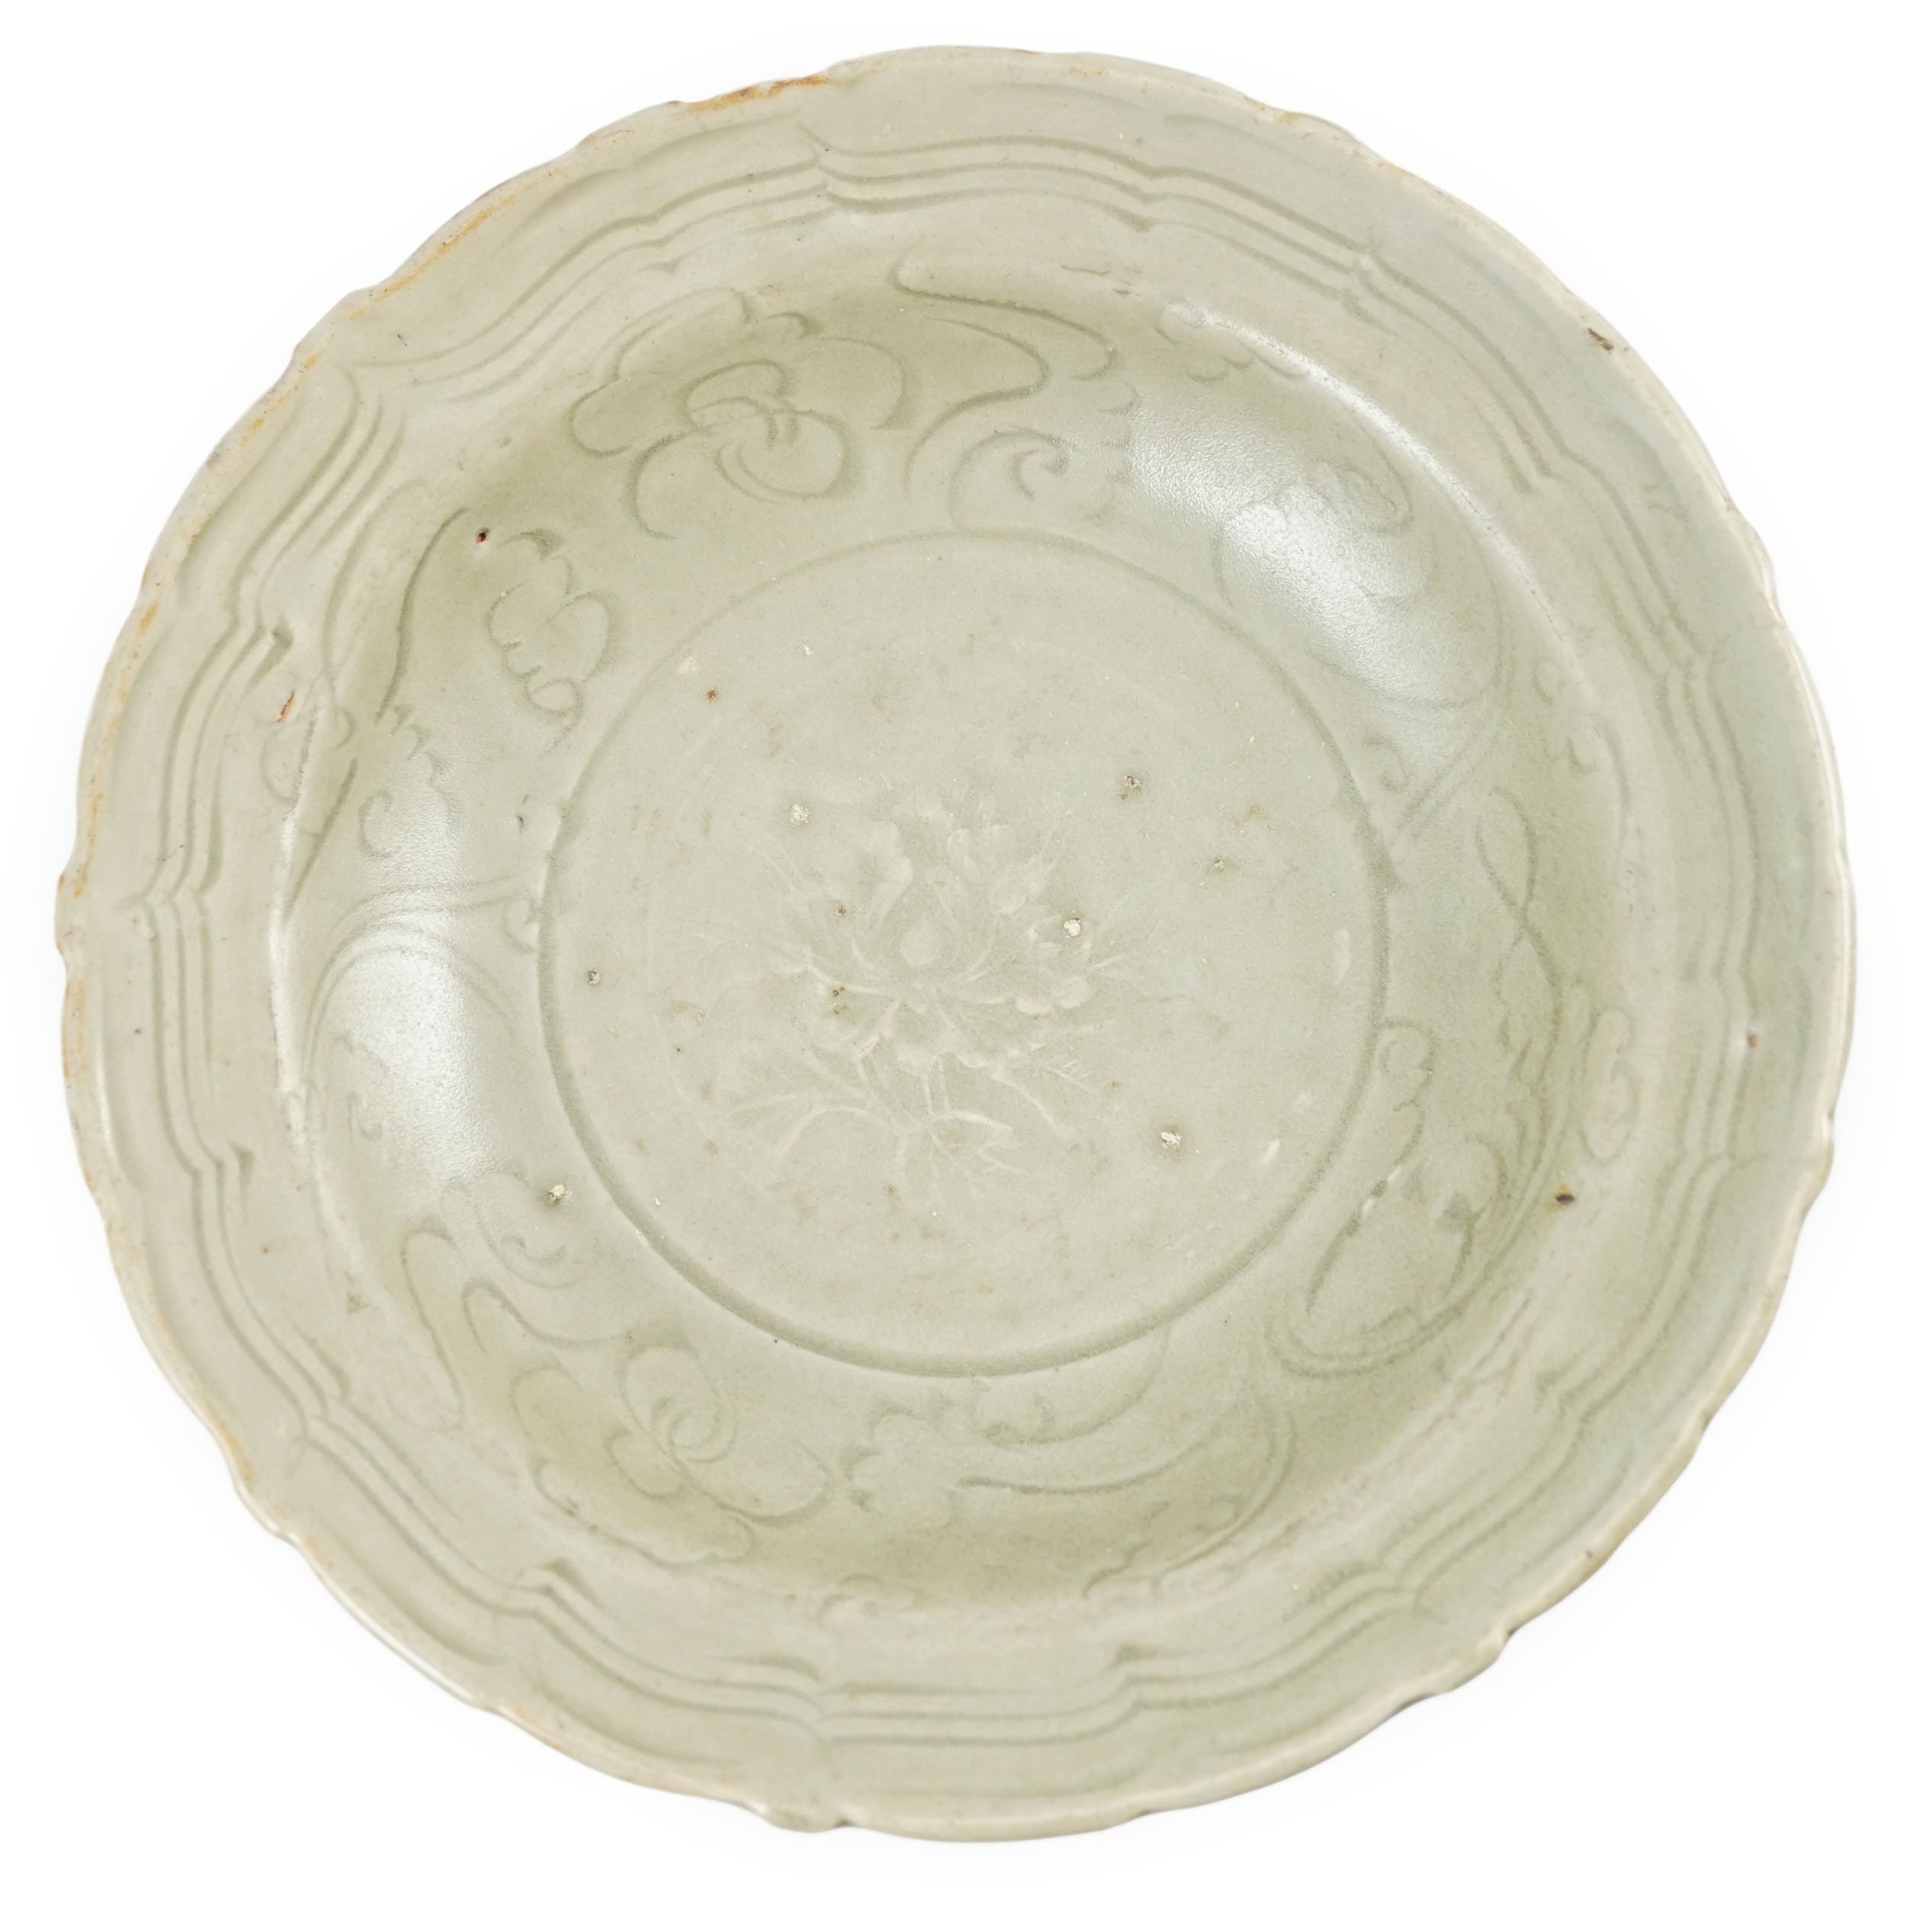 A Chinese Longquan celadon barbed rim dish, Yuan-early Ming dynasty, 14th/15th century, 22.5cm diameter